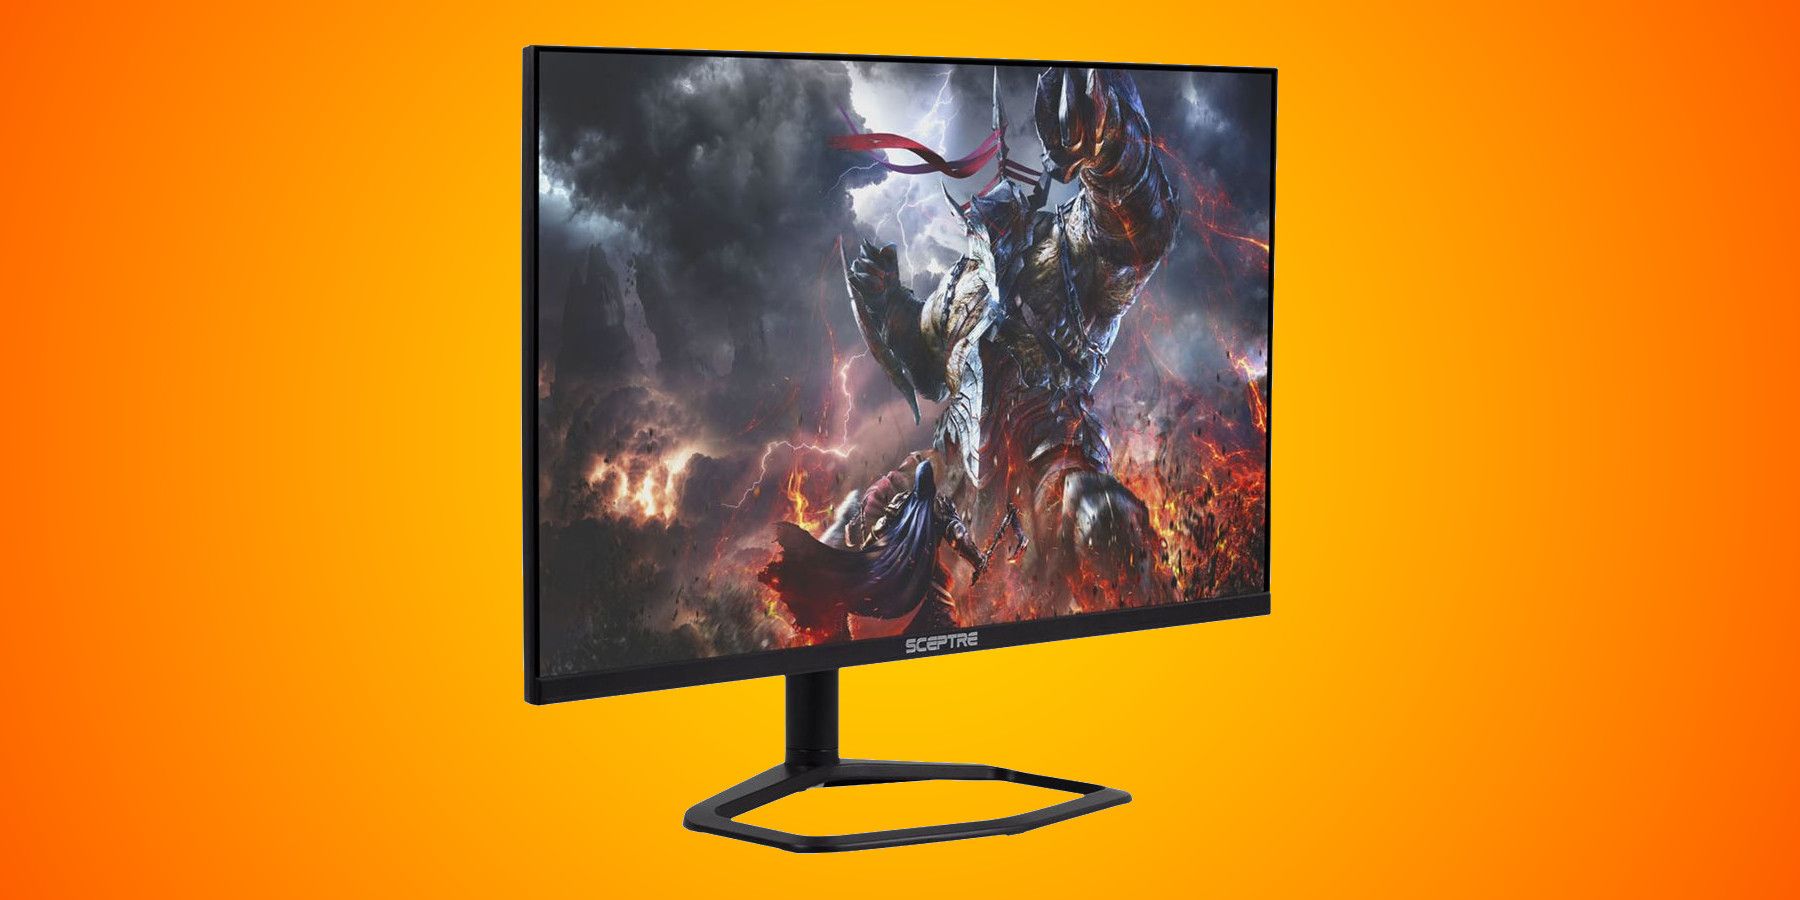 Act Now to Find Sceptre 27-Inch Gaming Monitor at $199.97